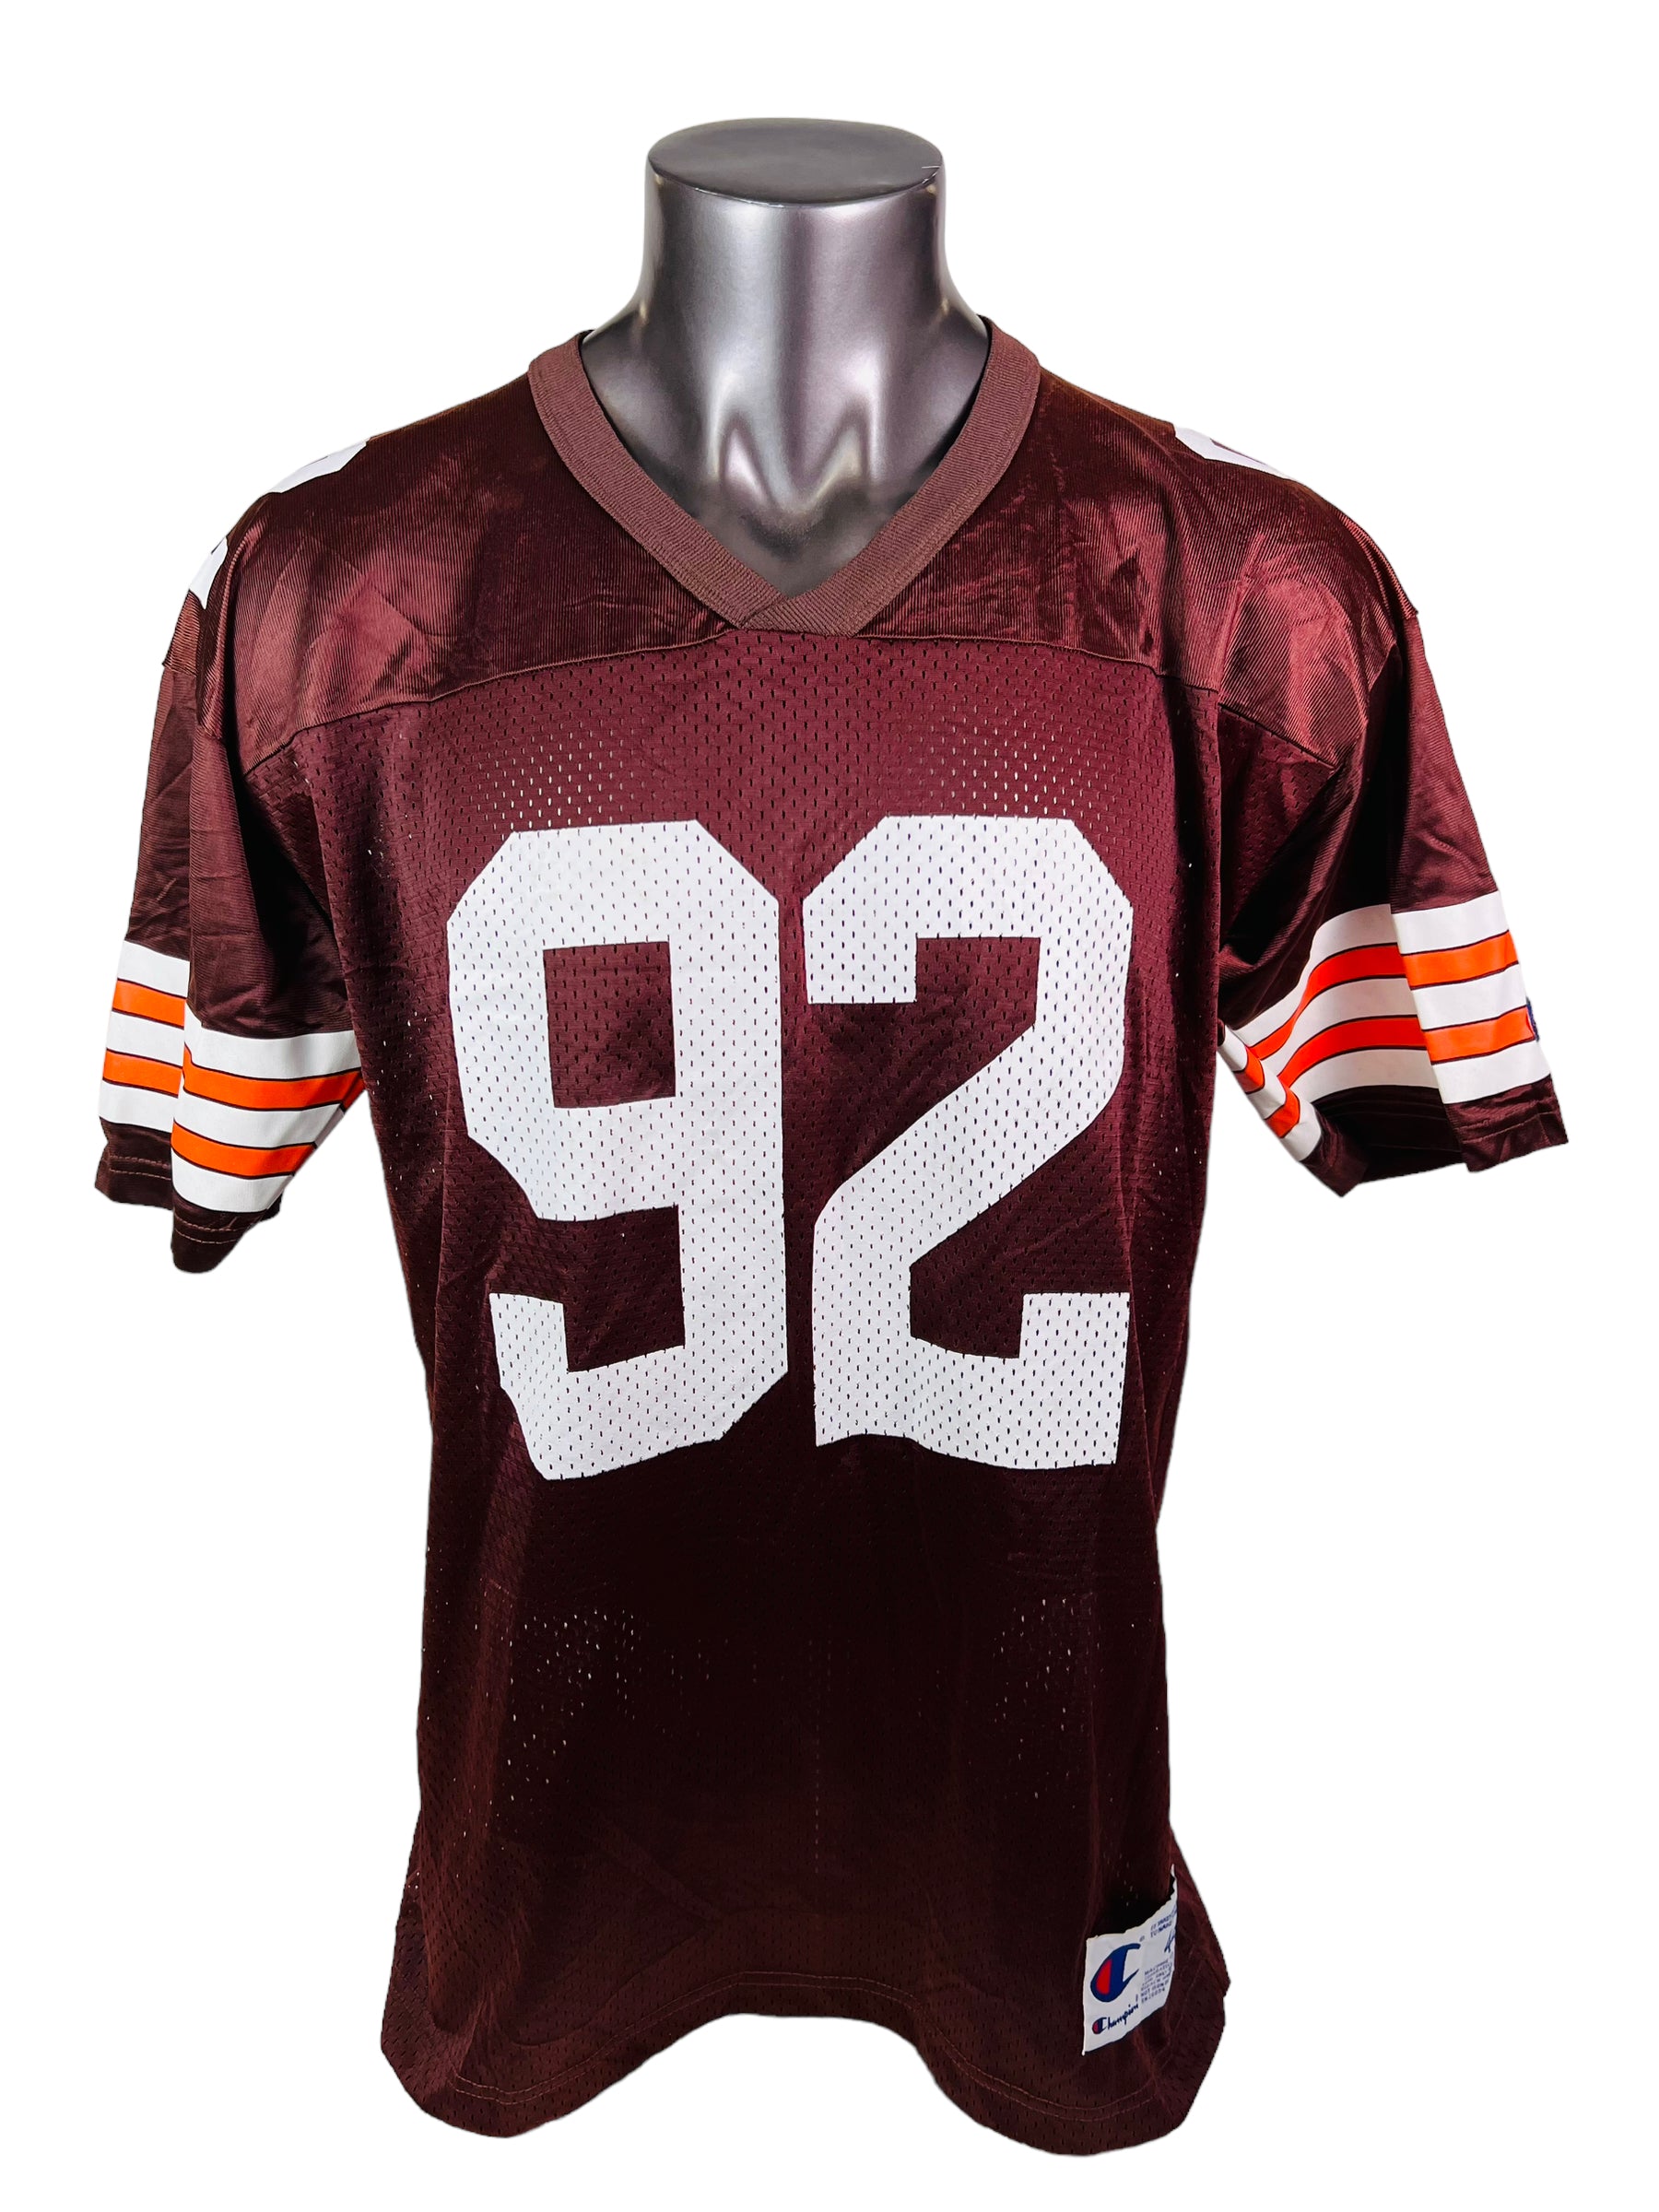 browns 44 jersey